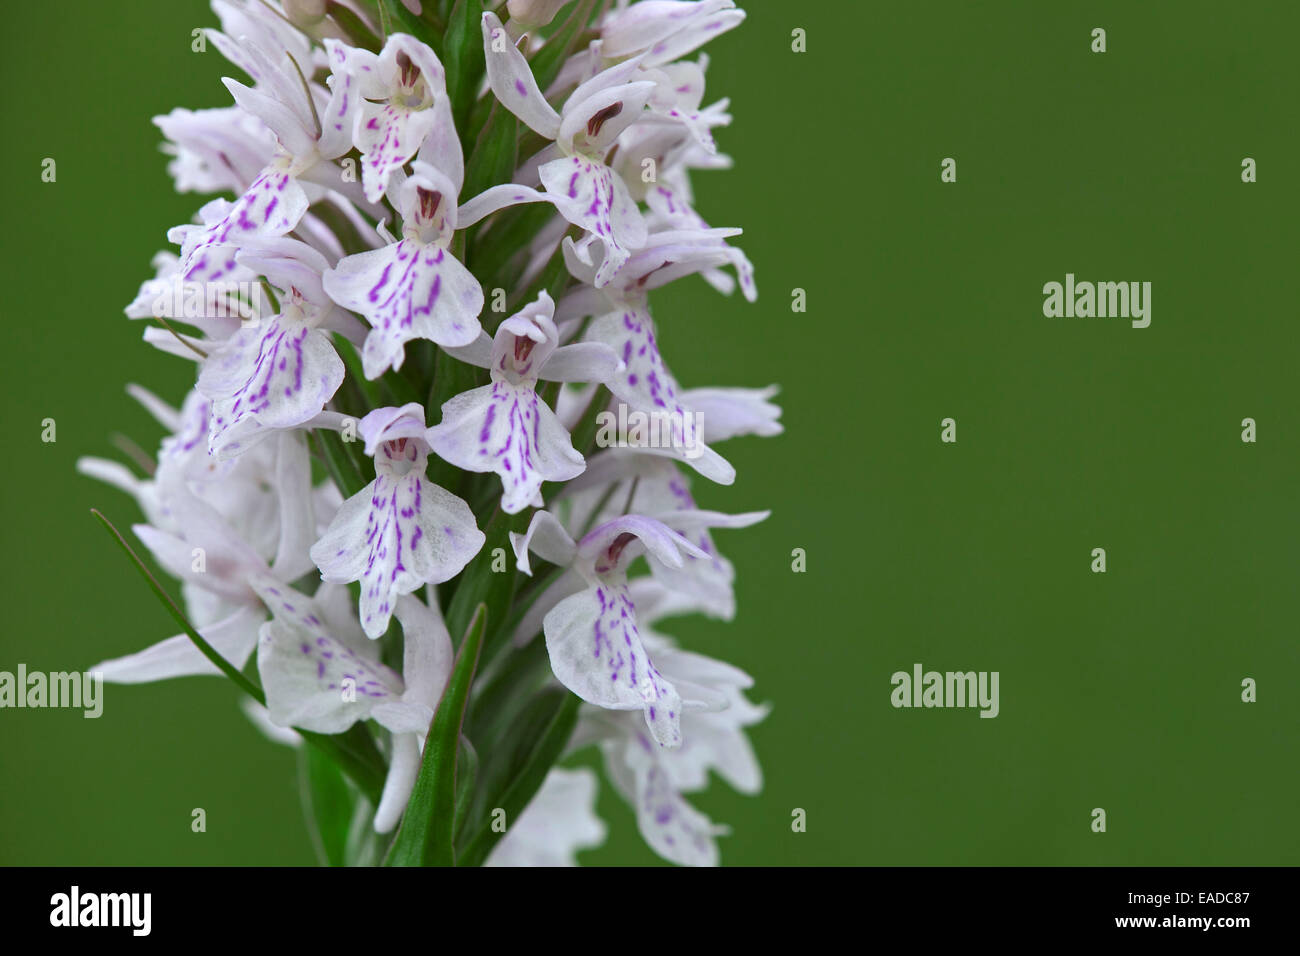 Heath spotted orchid / moorland spotted orchid (Dactylorhiza maculata) in flower Stock Photo